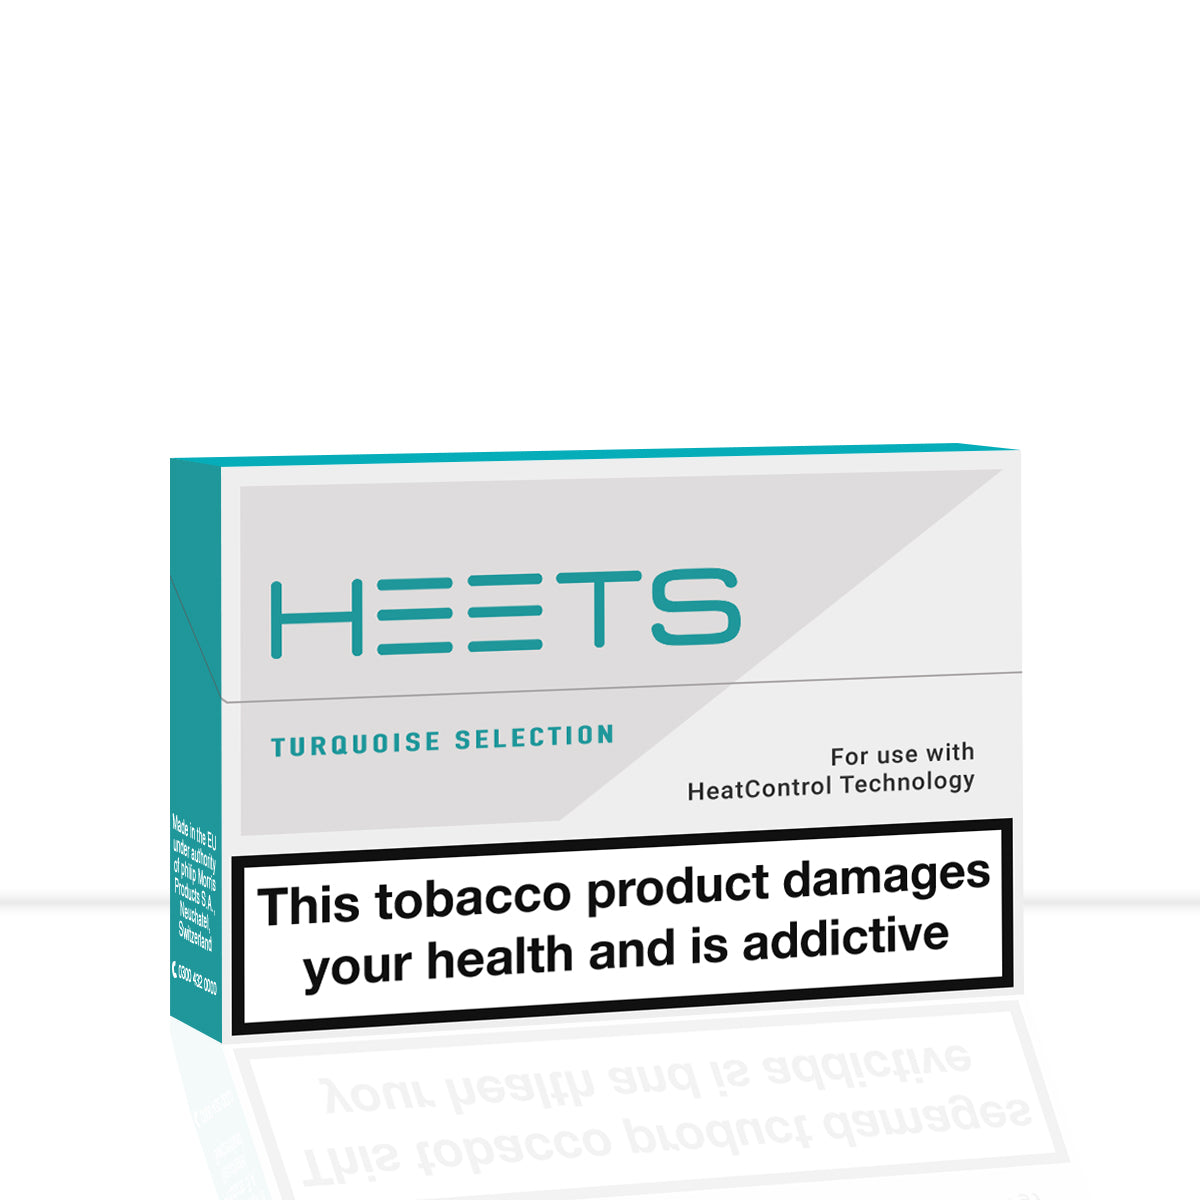 Top 5 IQOS Heets  Best Tobacco Sticks Flavours To Try – myCigara